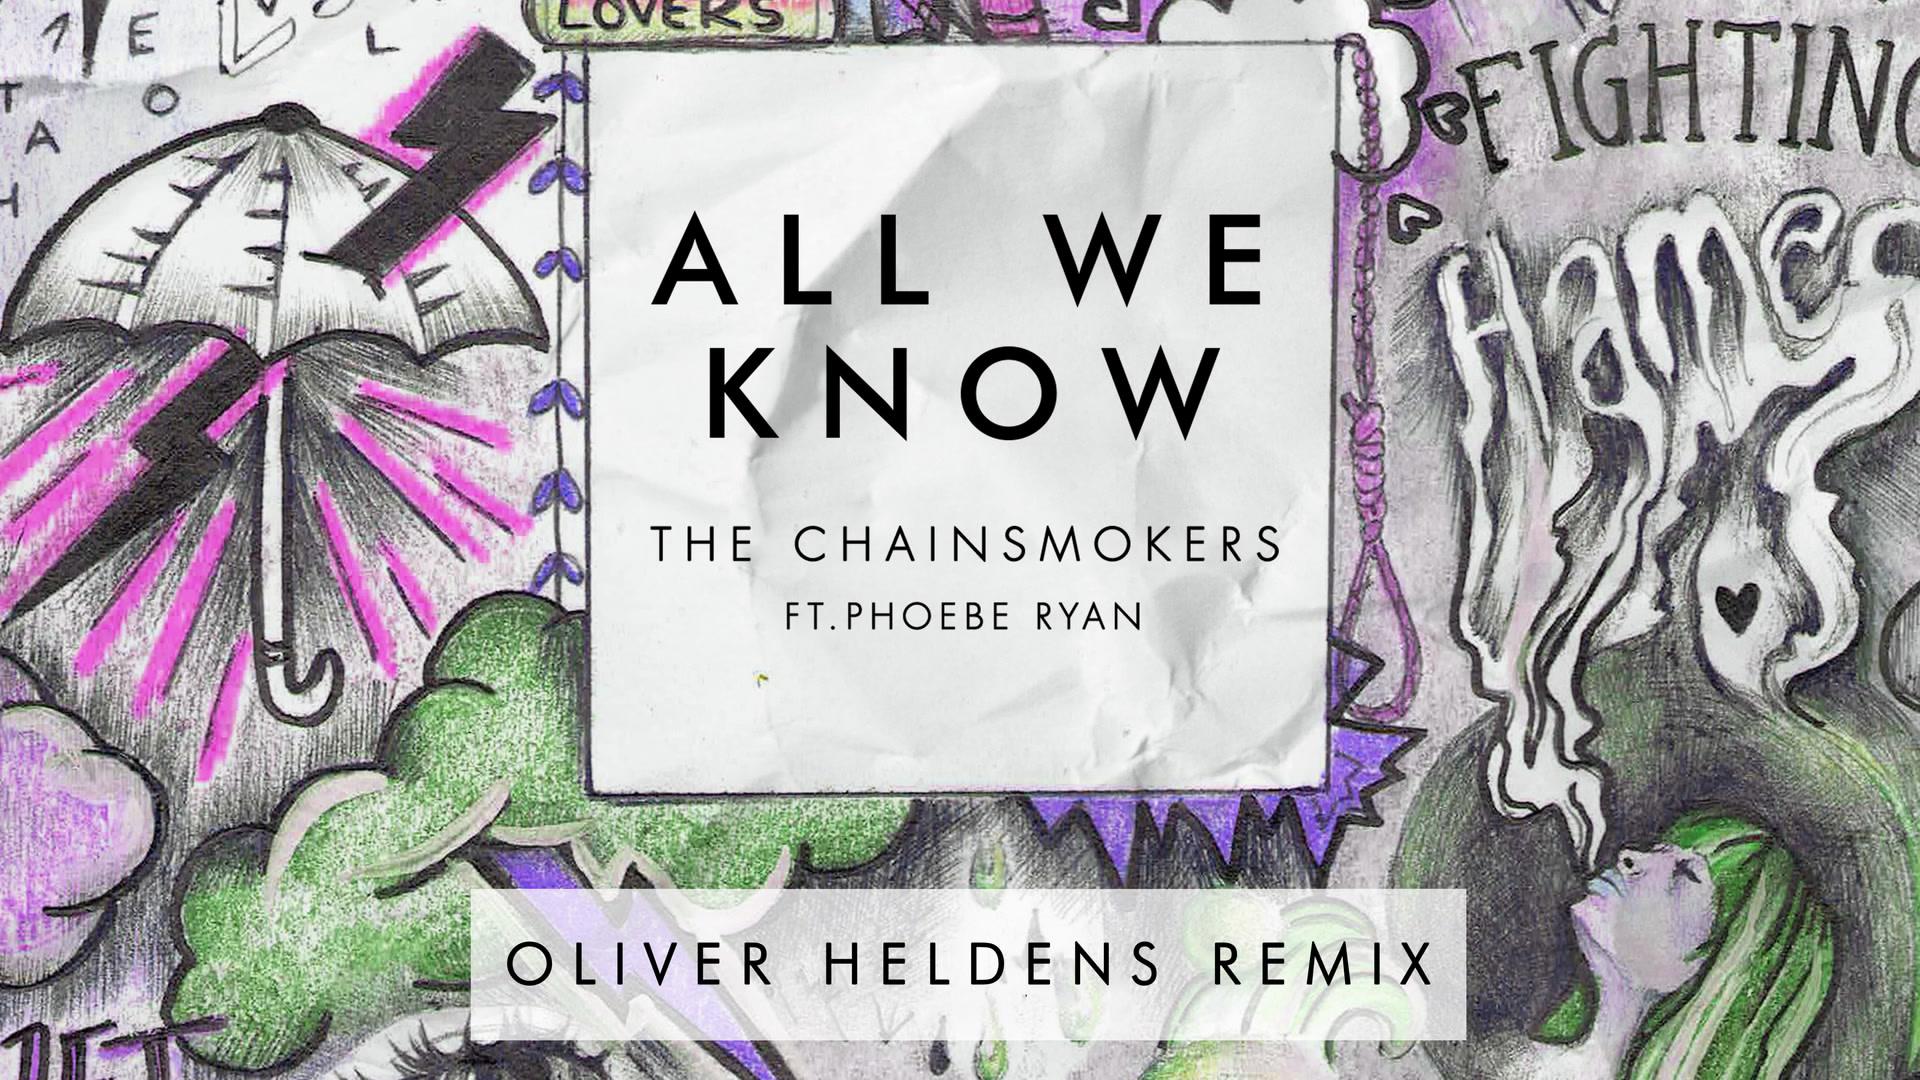 The Chainsmokers - All We Know (Oliver Heldens Remix - Audio)